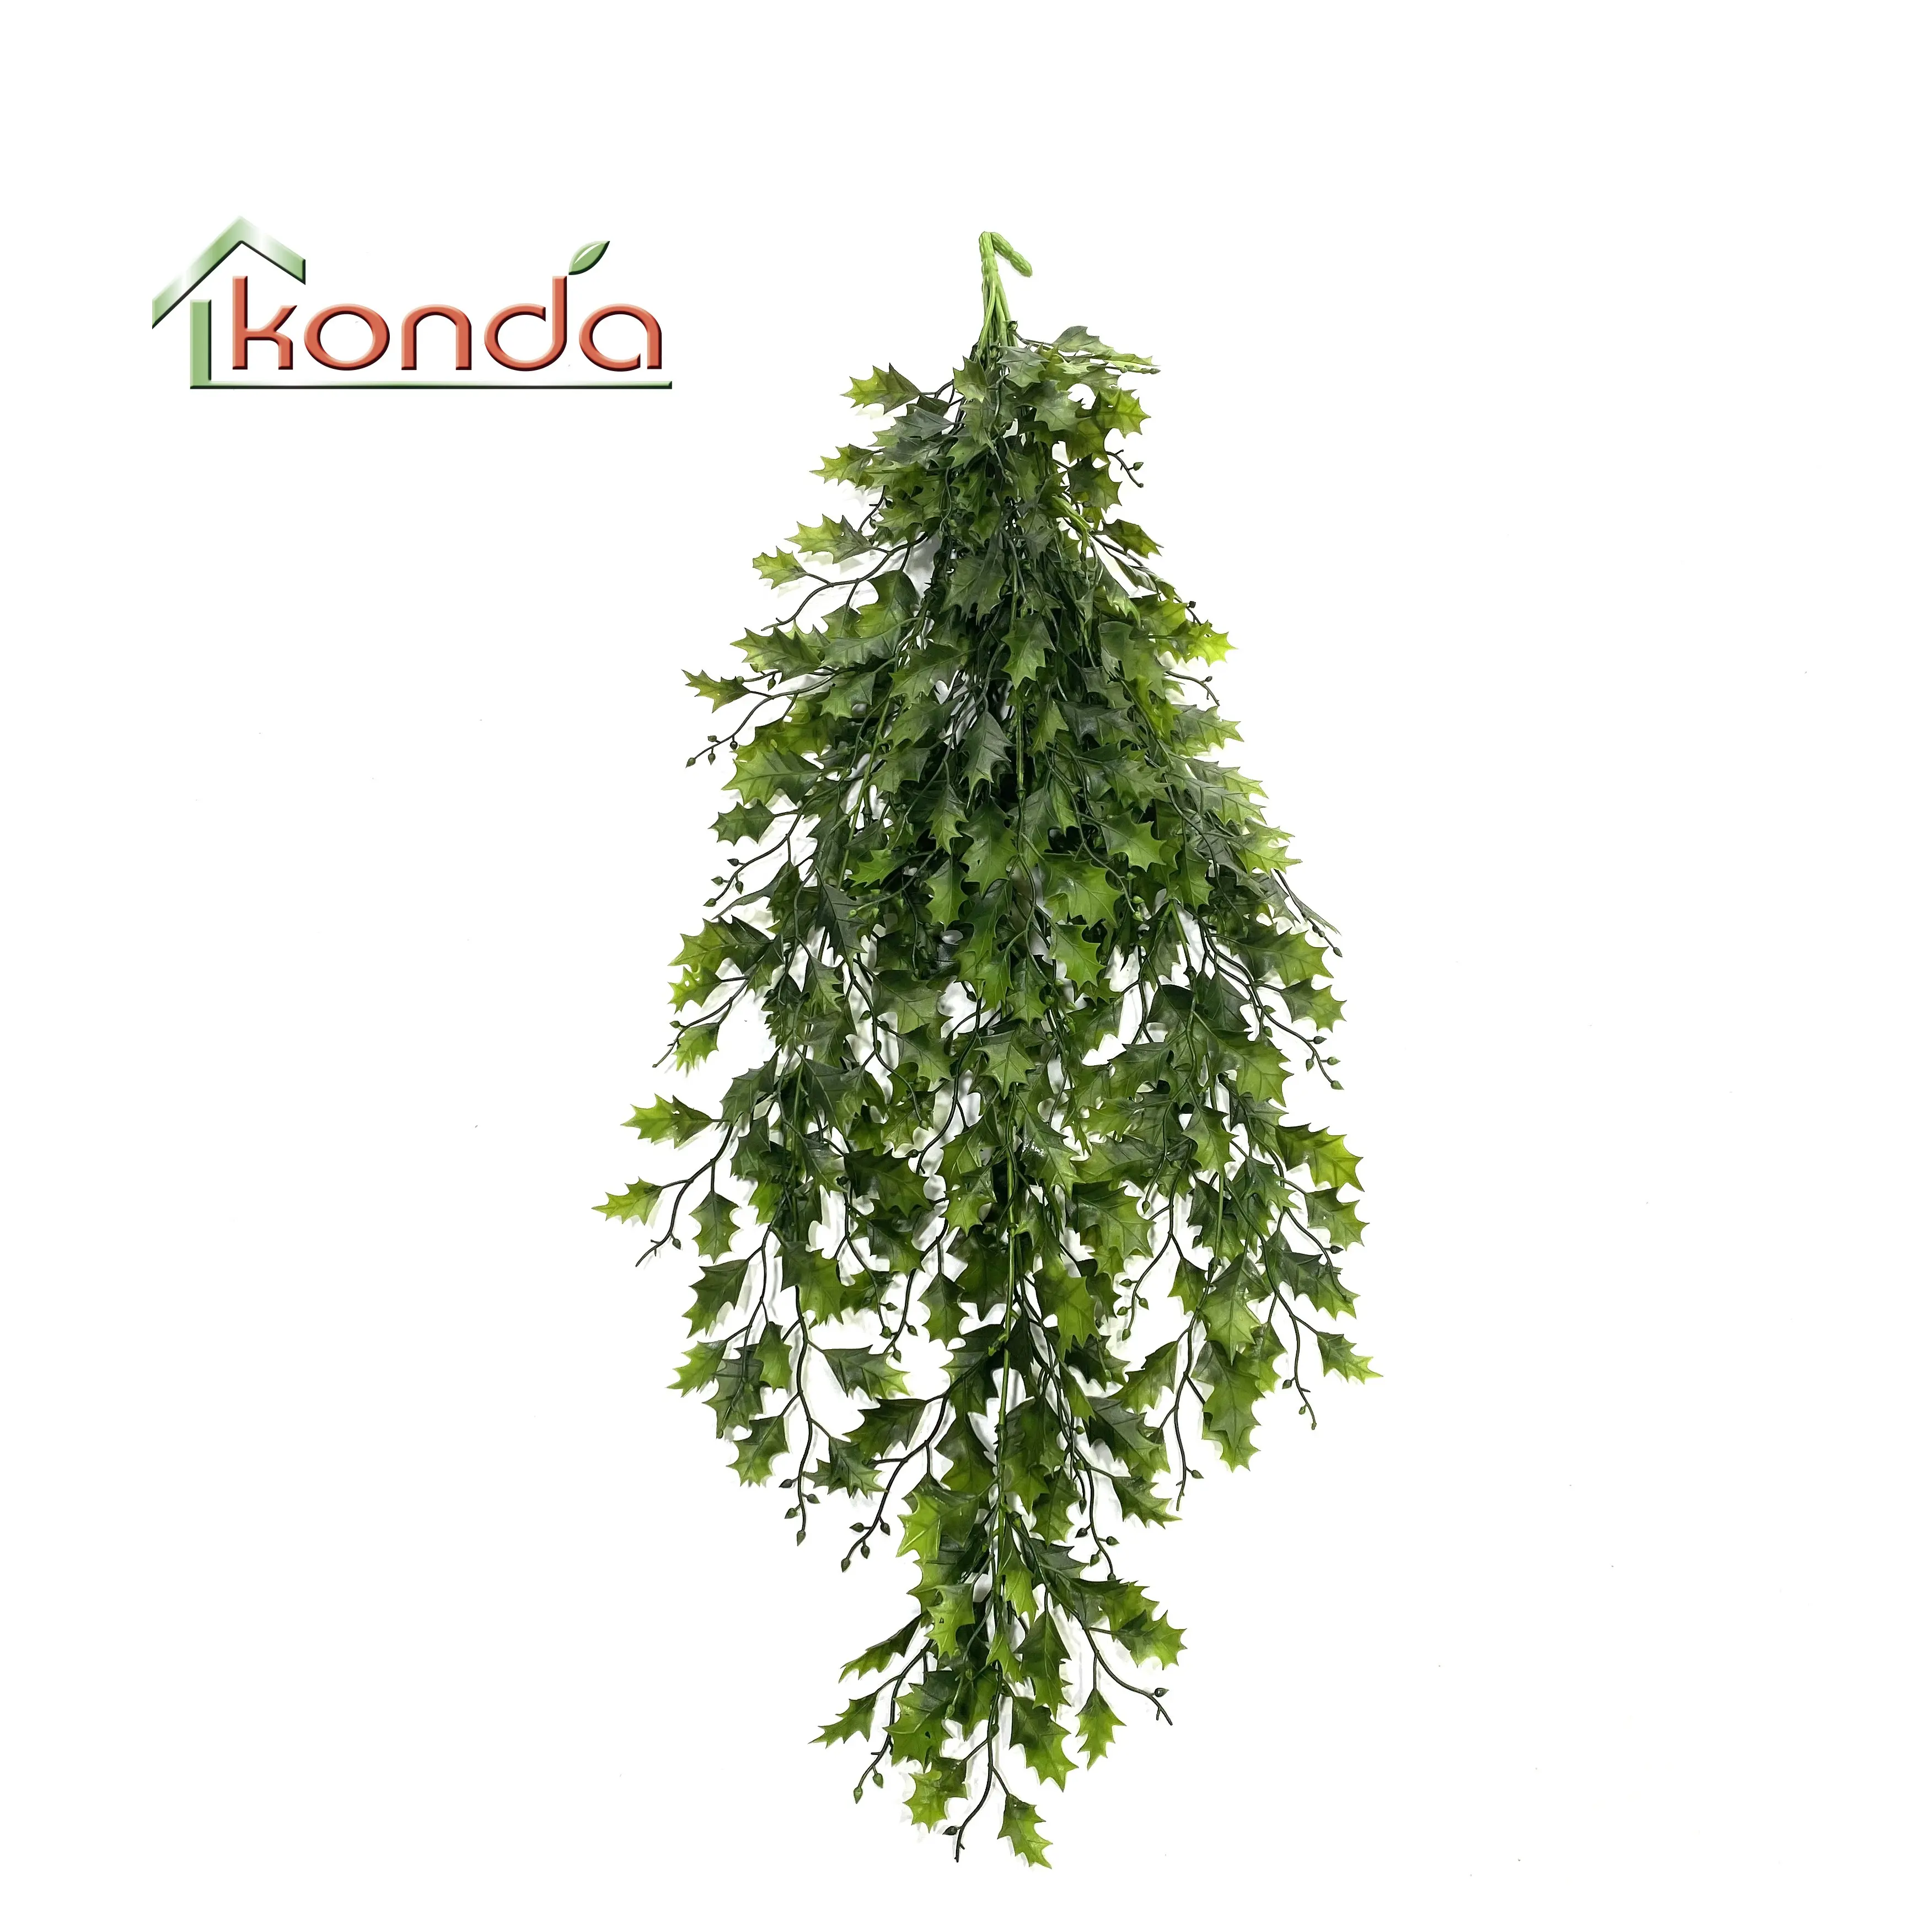 Konda industrial style ceiling Decoration Rattan hanging plants ivy fern artificial hanging plant